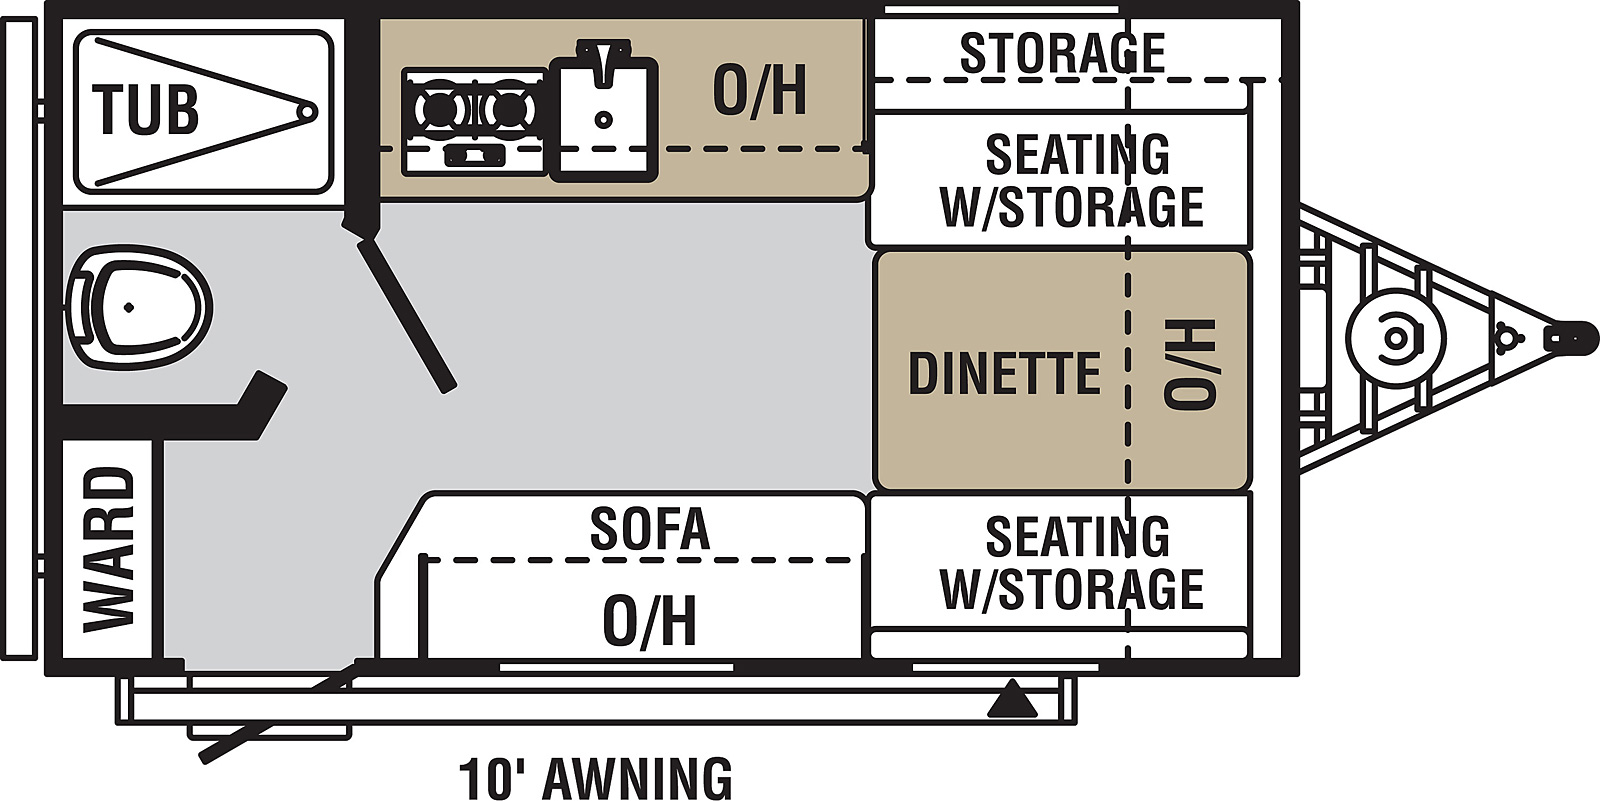 Viking Ultra-Lite 14SR floorplan. The 14SR has no slide outs and one entry door.